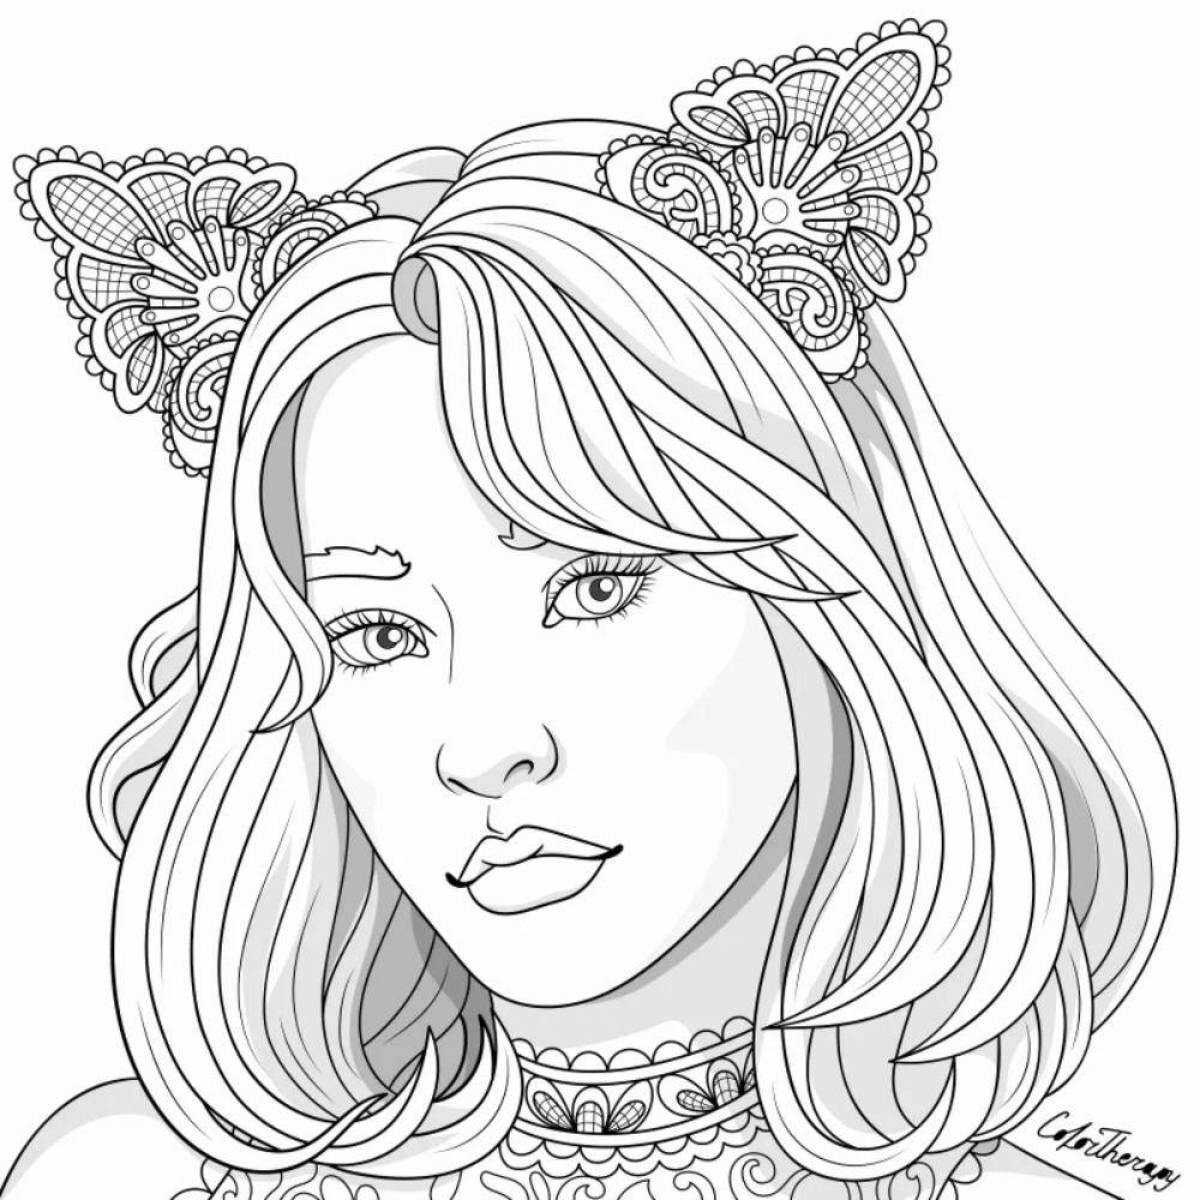 A fascinating coloring book for girls 11-12 years old